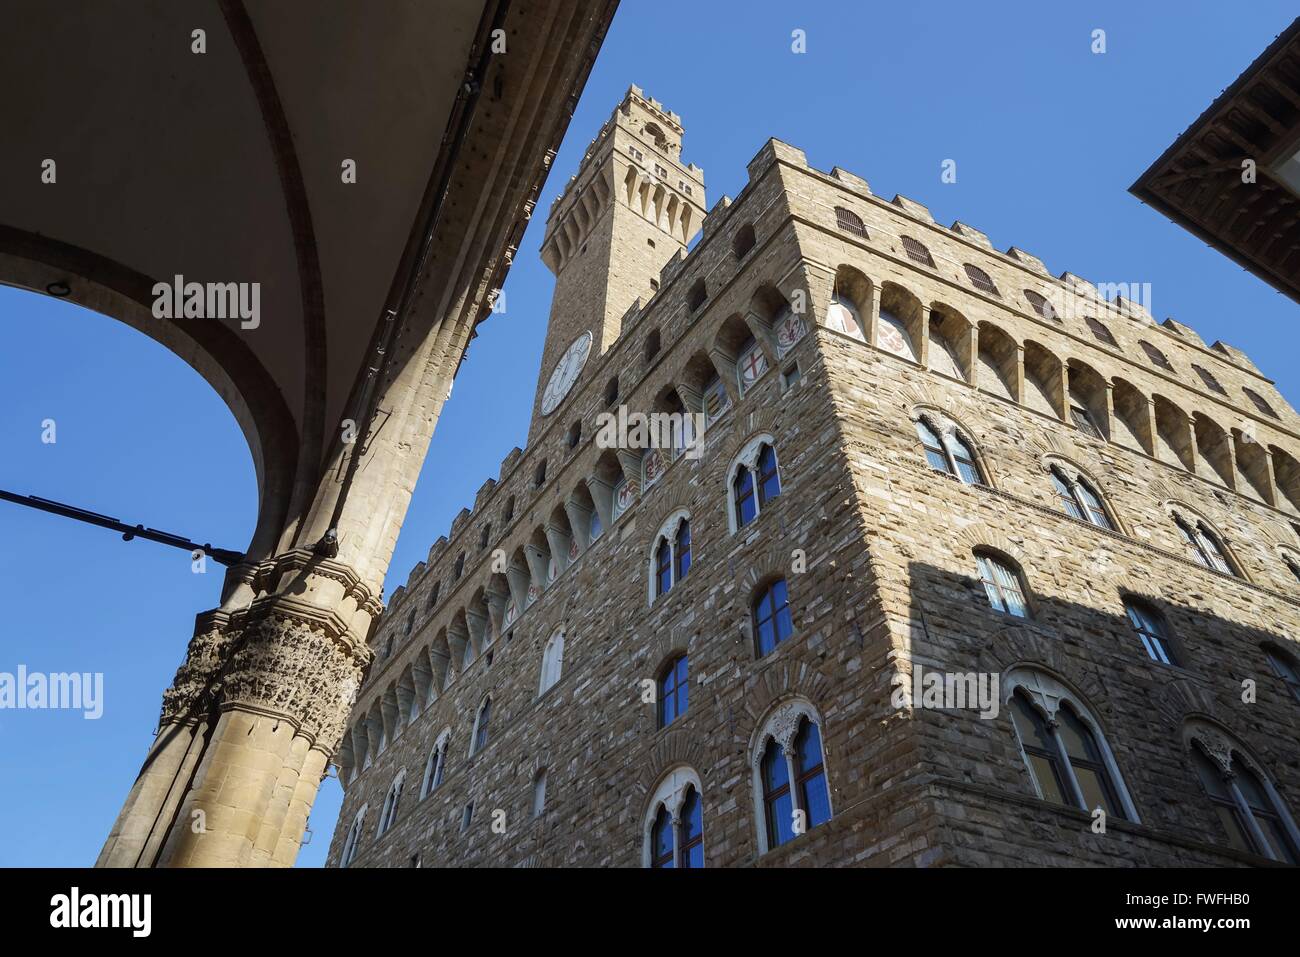 Italy: Palazzo Vecchio (town hall) as seen from Loggia dei Lanzi in Florence. Photo from 20. February 2016. Stock Photo